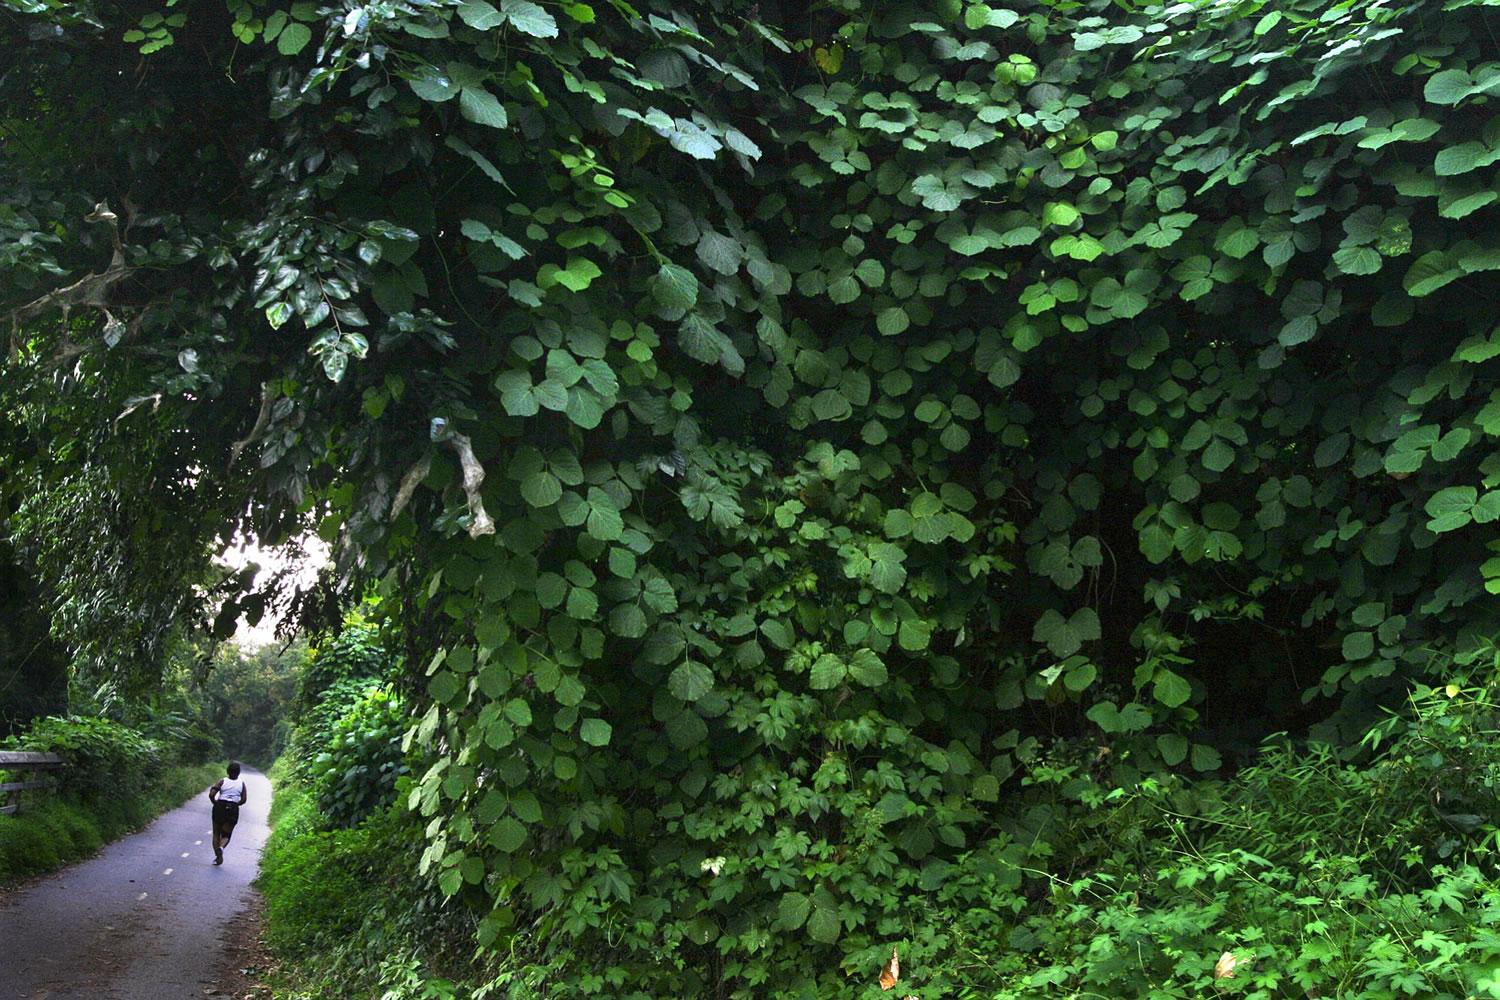 A jogger running past kudzu vines that overwhelm trees and the underbrush along the Potomac River on the Capital Crescent Trail in Washington, D.C.